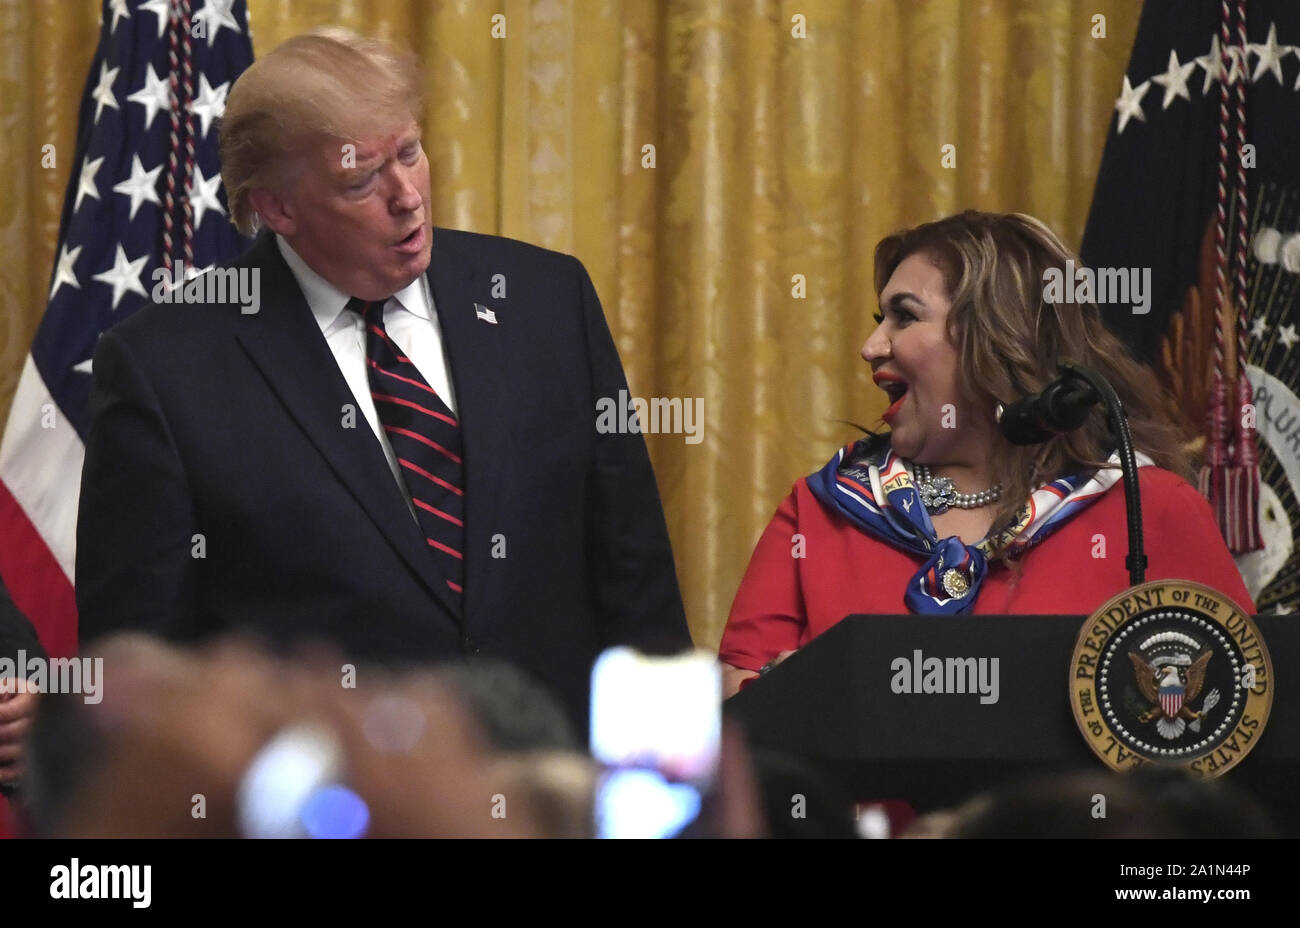 Washington, United States. 27th Sep, 2019. President Donald Trump (L) welcomes Maria Rios, president and CEO of Nation Waste of Texas, to make remarks before the Hispanic Heritage Month reception in the East Room of the White House, Friday, September 27, 2019, in Washington, DC. Trump noted Latin achievements, Hispanics in his cabinet and advancing democracy in Latin America. Photo by Mike Theiler/UPI Credit: UPI/Alamy Live News Stock Photo